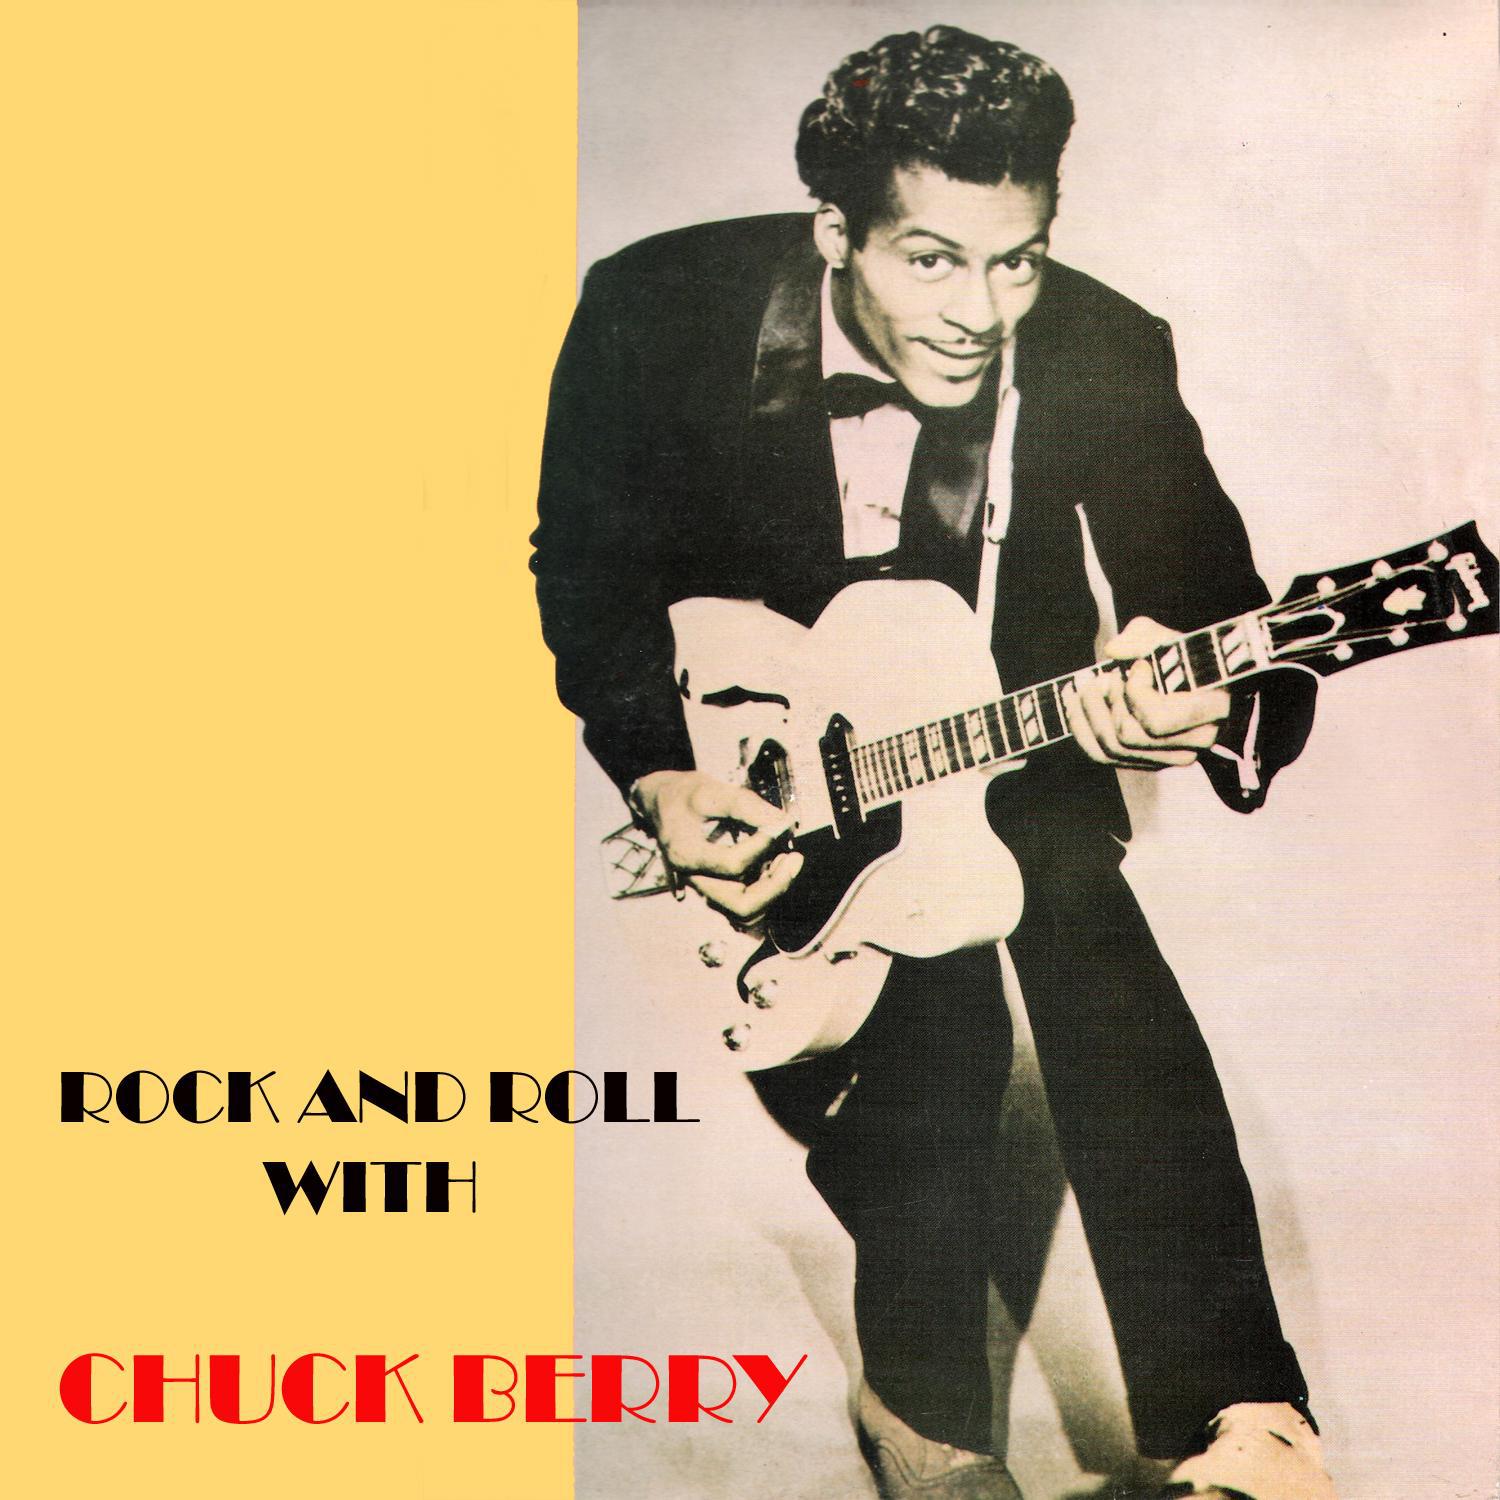 Rock and Roll with Chuck Berry